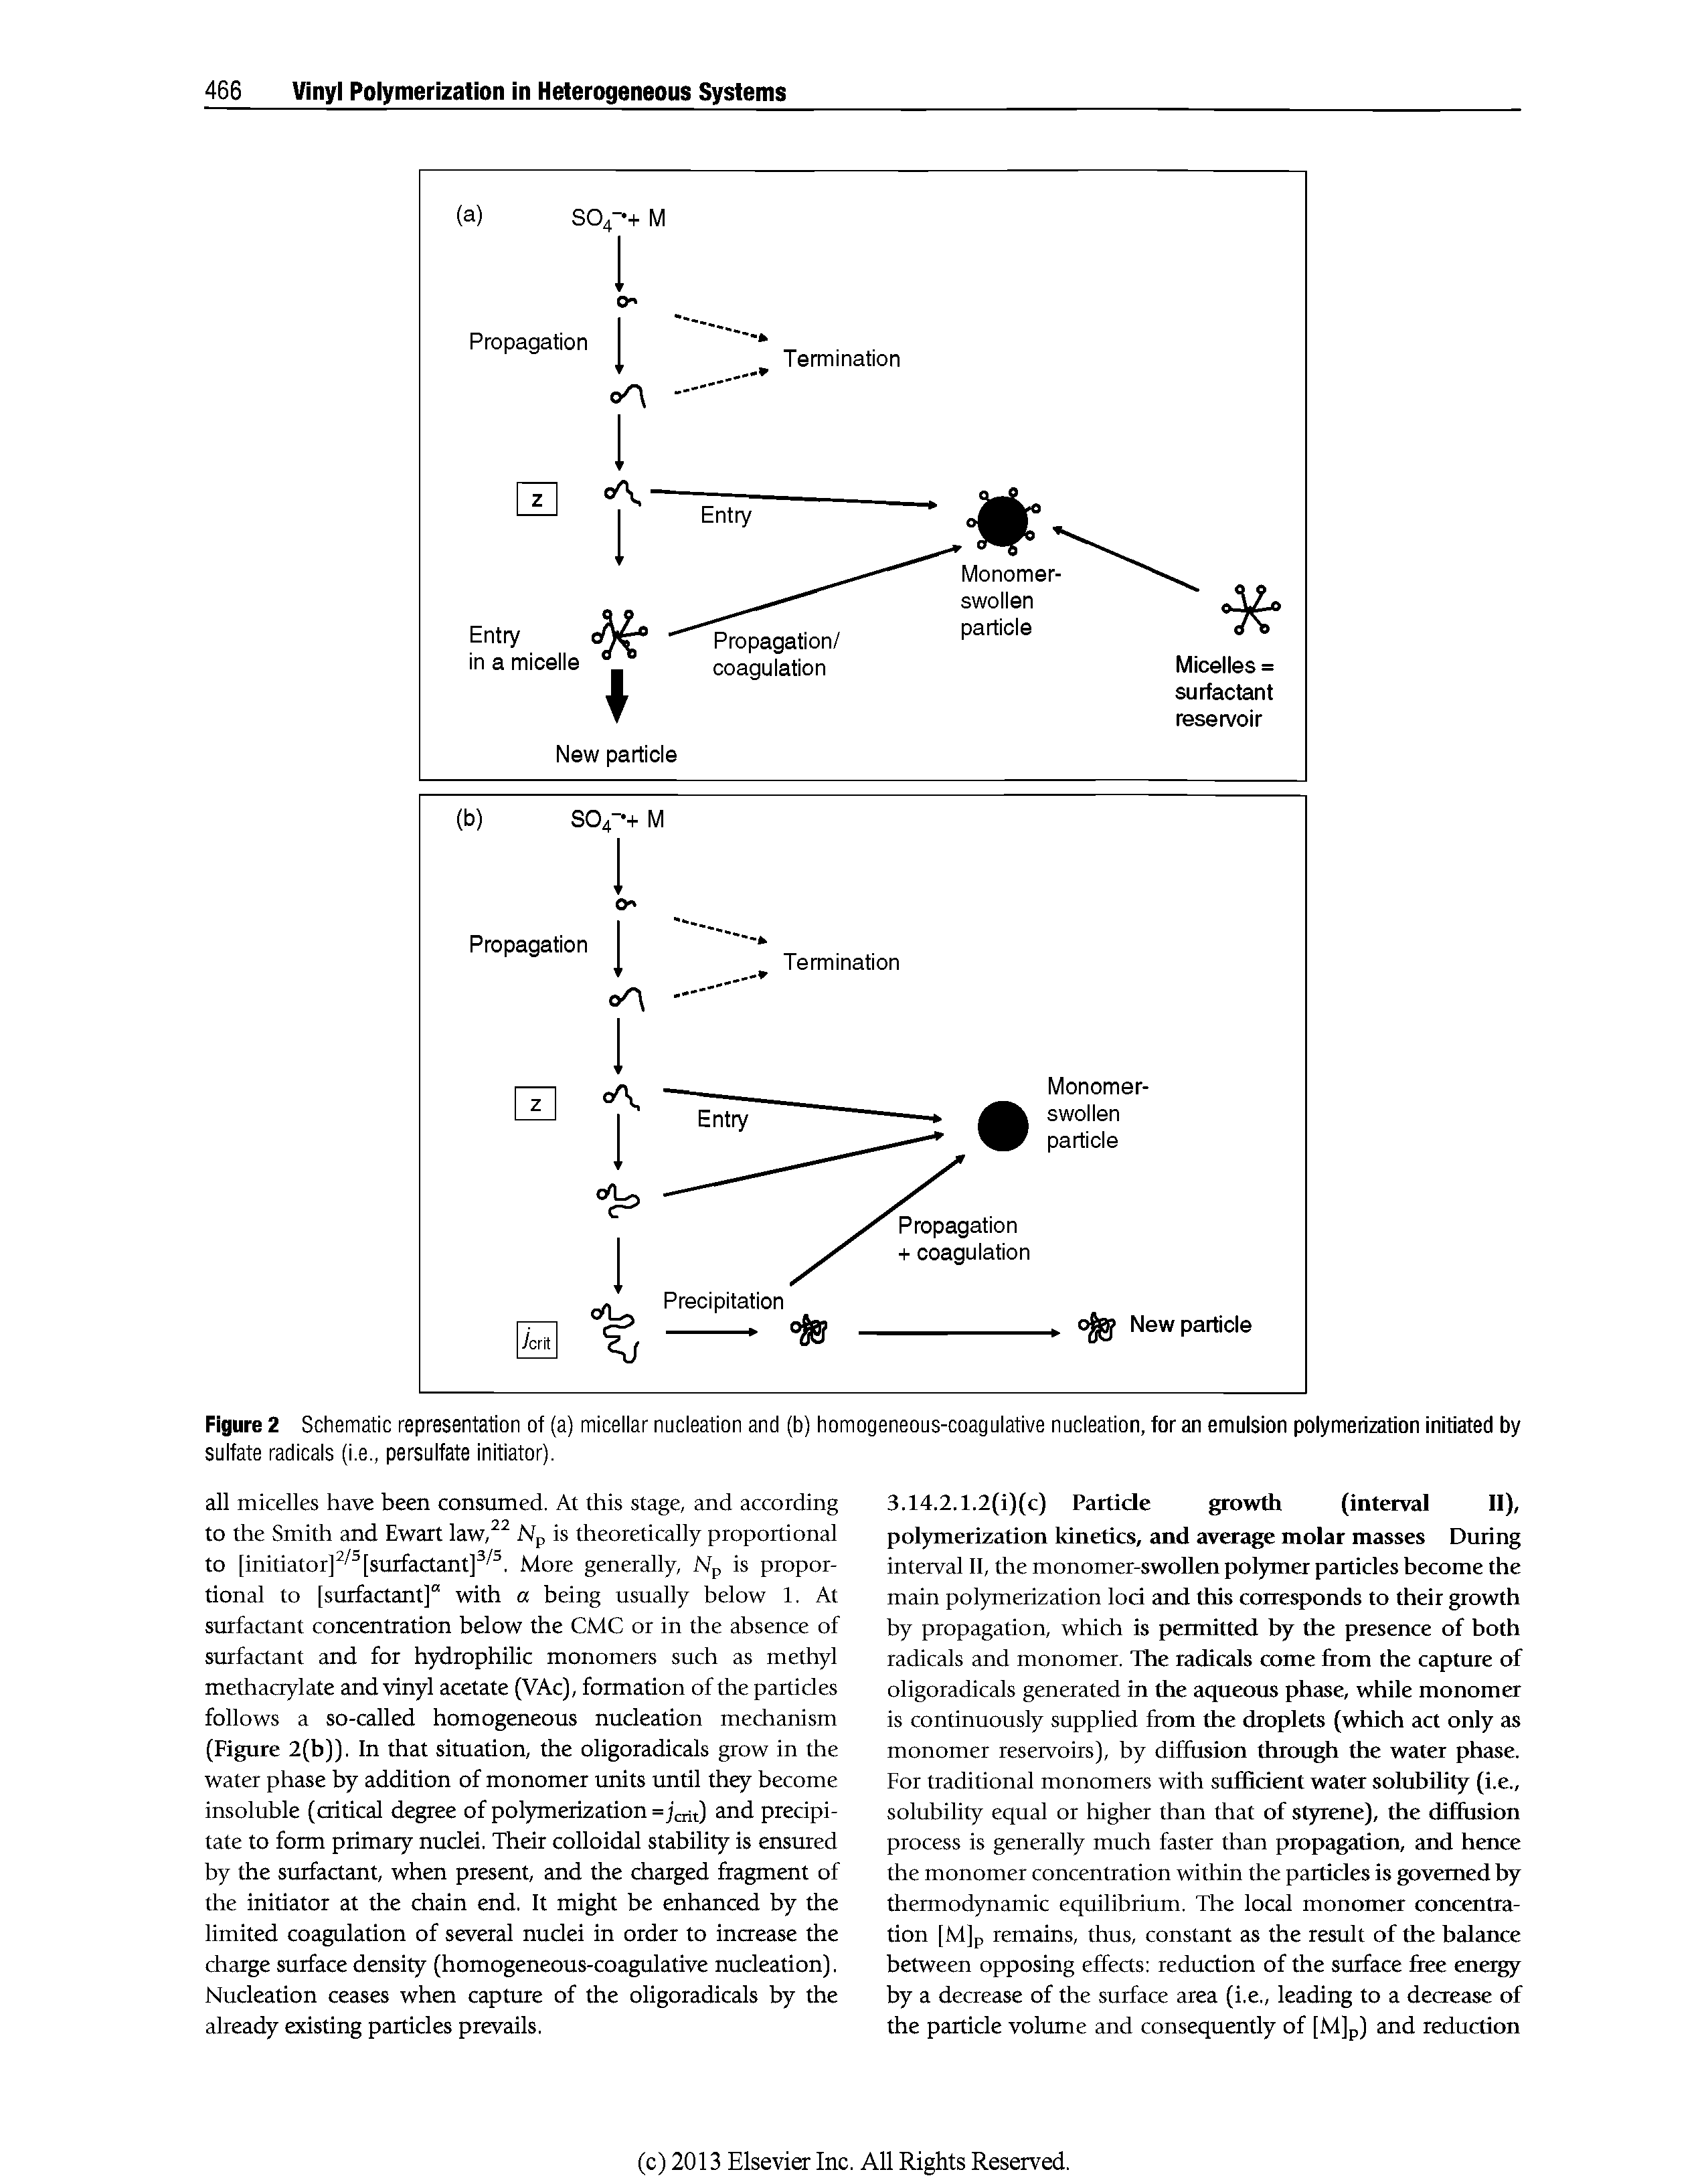 Figure 2 Schematic representation of (a) miceiiar nucieation and (b) homogeneous-coaguiative nucieation, for an emulsion polymerization initiated by suifate radicais (i.e., persuifate initiator).